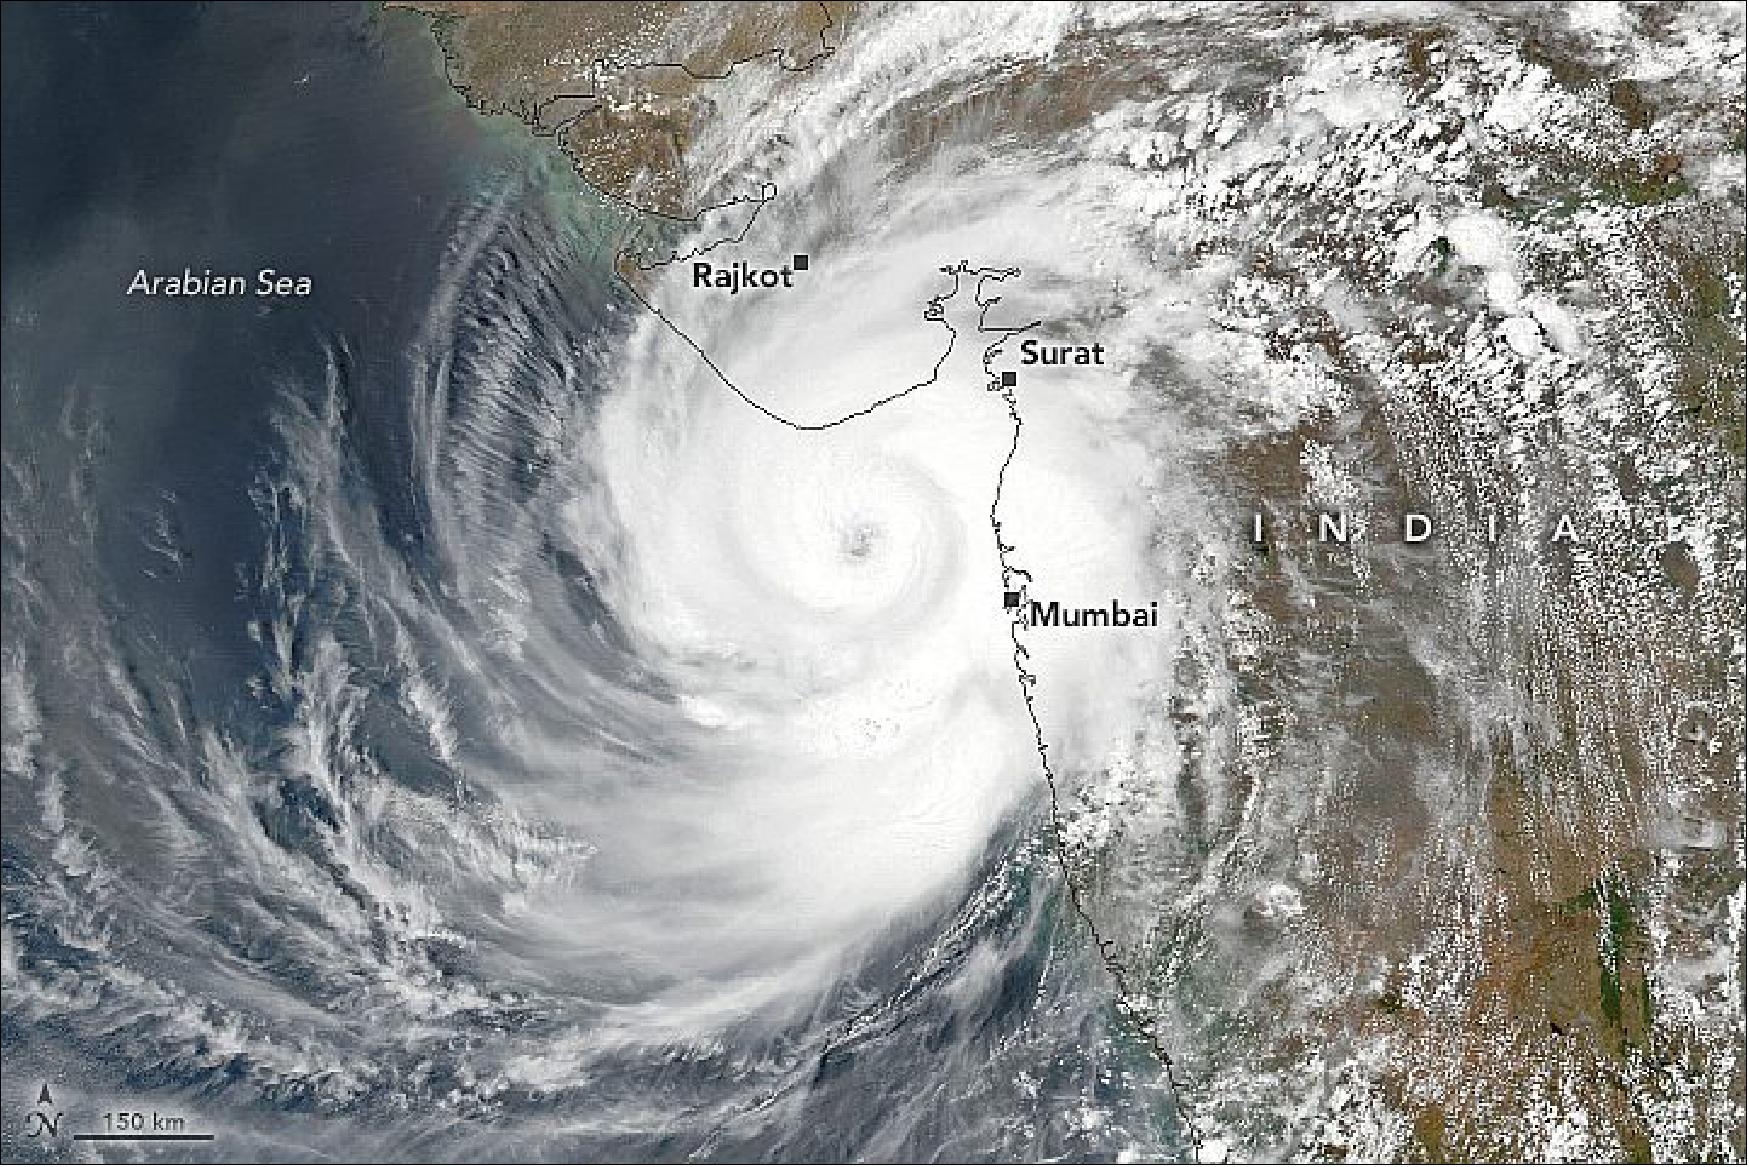 Figure 45: Tropical cyclones are scarce in the Arabian Sea, but unusually warm ocean temperatures helped fuel this storm. As Tauktae approached land, the U.S. Joint Typhoon Warning Center reported maximum sustained winds of 100 knots (185 km/125 miles per hour) and gusts up to 125 knots (230 km/145 miles), equivalent to a category 3 or 4 hurricane. That made Tauktae the fifth-strongest storm observed in the Arabian Sea since 1998. Winds of that strength can easily snap trees, topple power lines, and damage homes. The storm also pushed a destructive storm surge of water onto the Indian coast; reports suggest it may have been as high as 3 meters in some areas (image credit: NASA Earth Observatory image by Lauren Dauphin, using VIIRS data from NASA EOSDIS LANCE, GIBS/Worldview, and the Suomi National Polar-orbiting Partnership. Story by Adam Voiland)